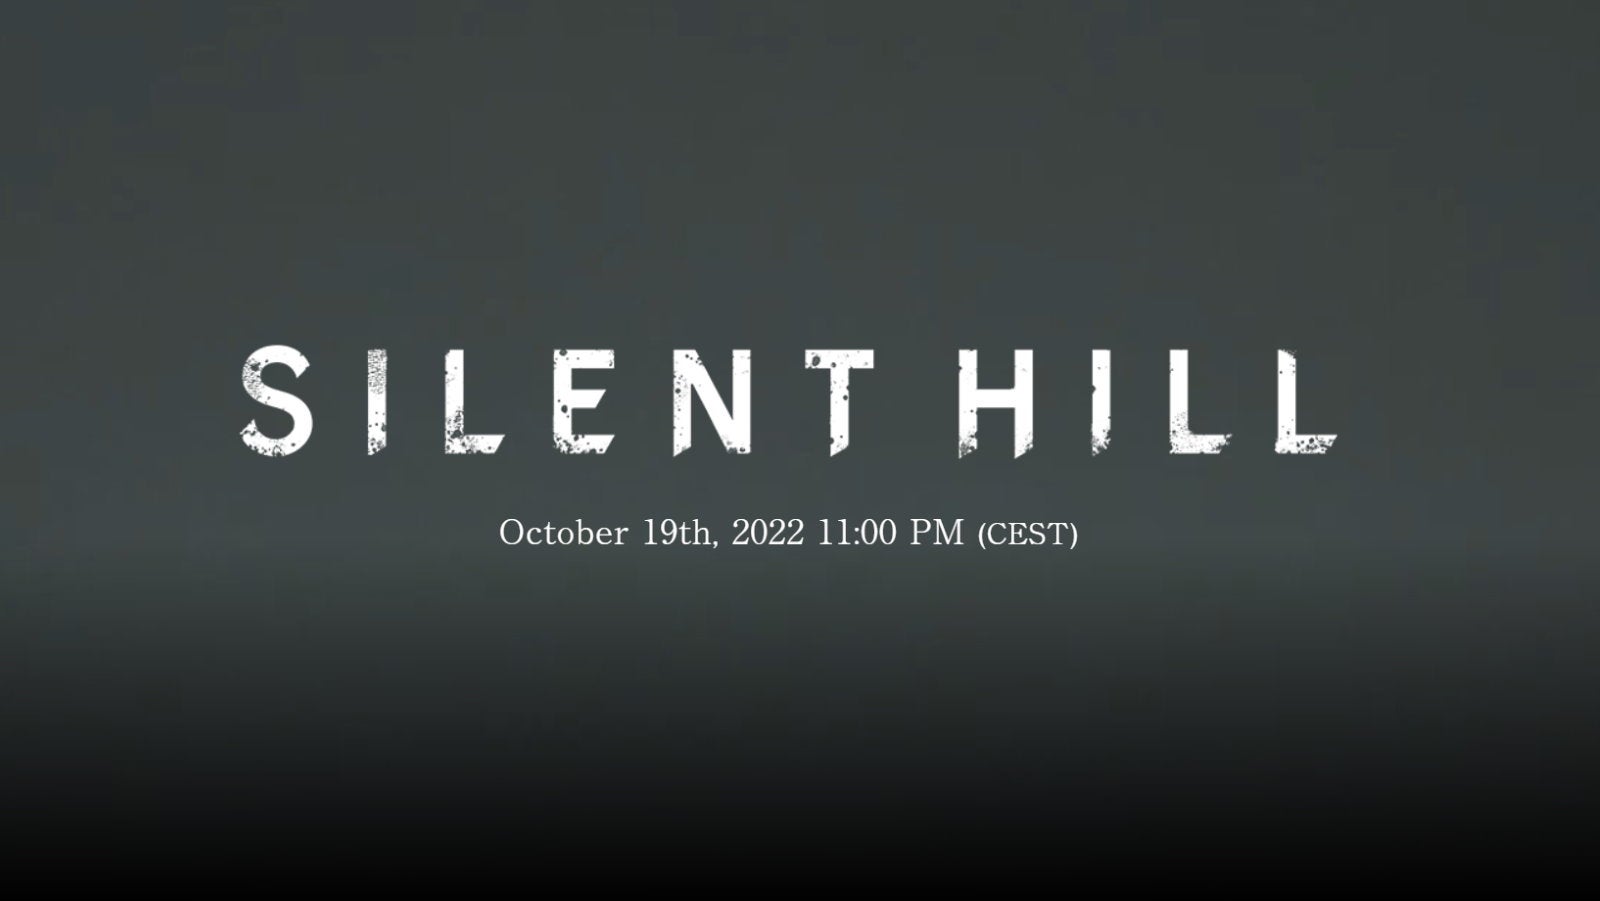 A black background with the words Silent Hill in white lettering, plus a date and time for Konami's Silent Hill Transmission stream